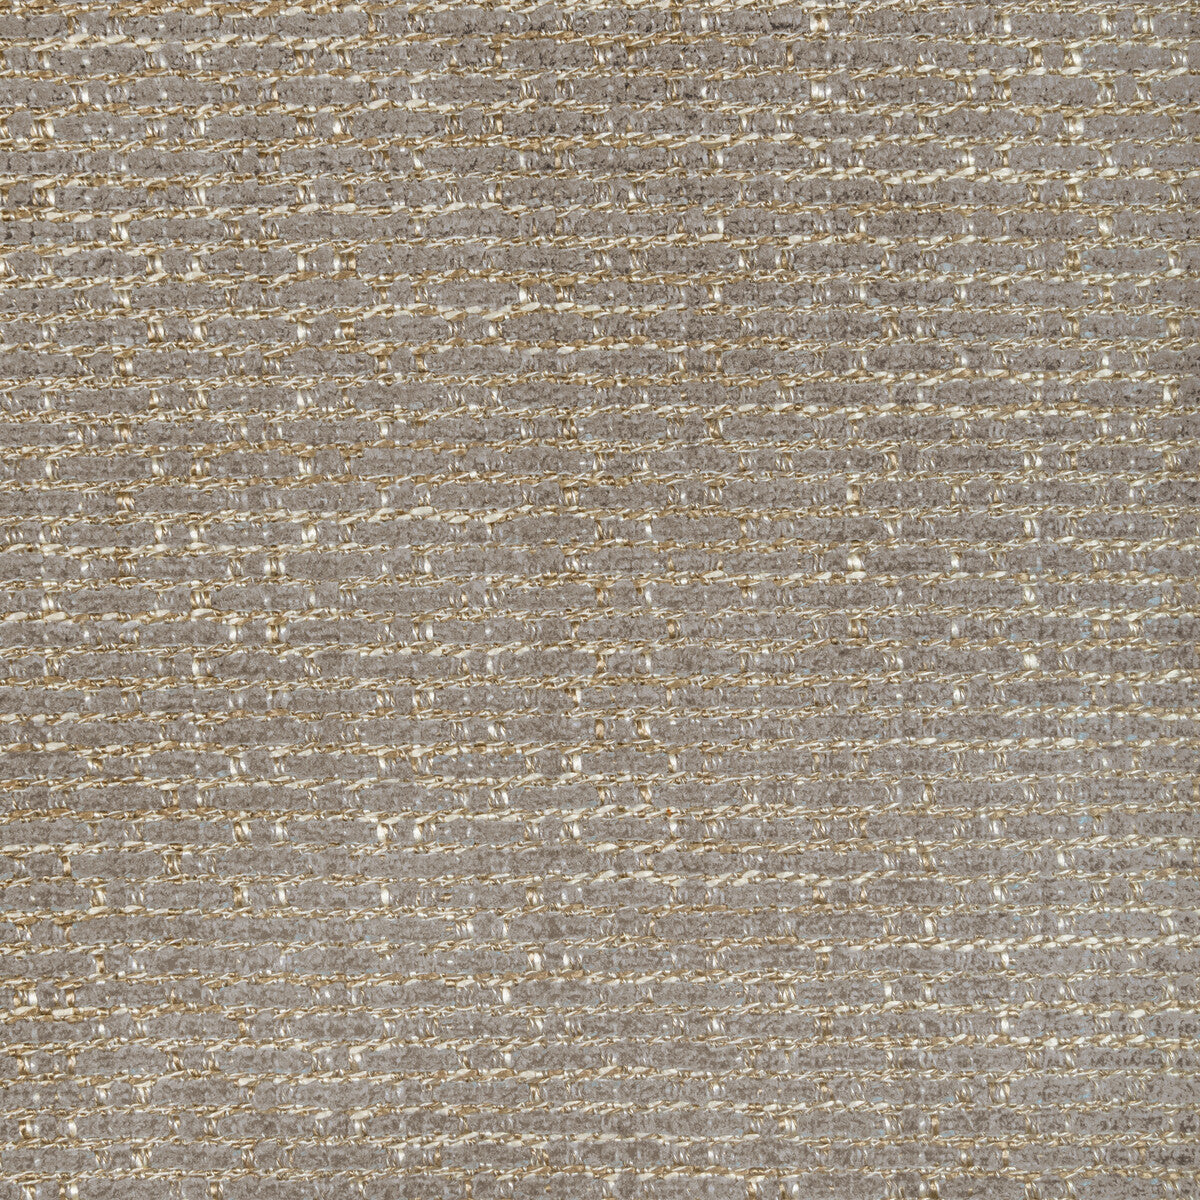 Kravet Design fabric in 36409-11 color - pattern 36409.11.0 - by Kravet Design in the Performance Crypton Home collection